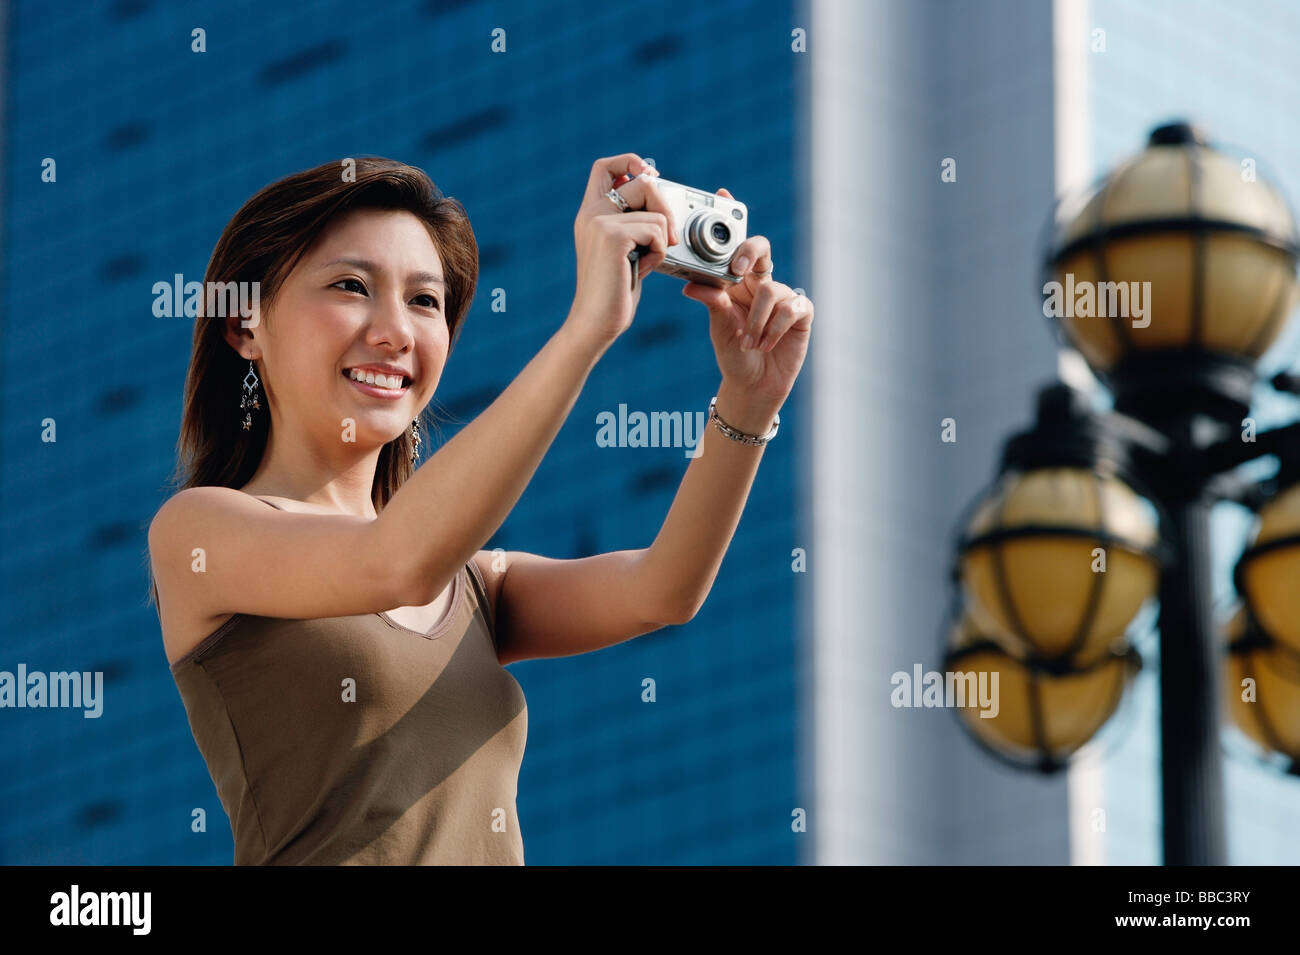 Woman taking a picture Stock Photo